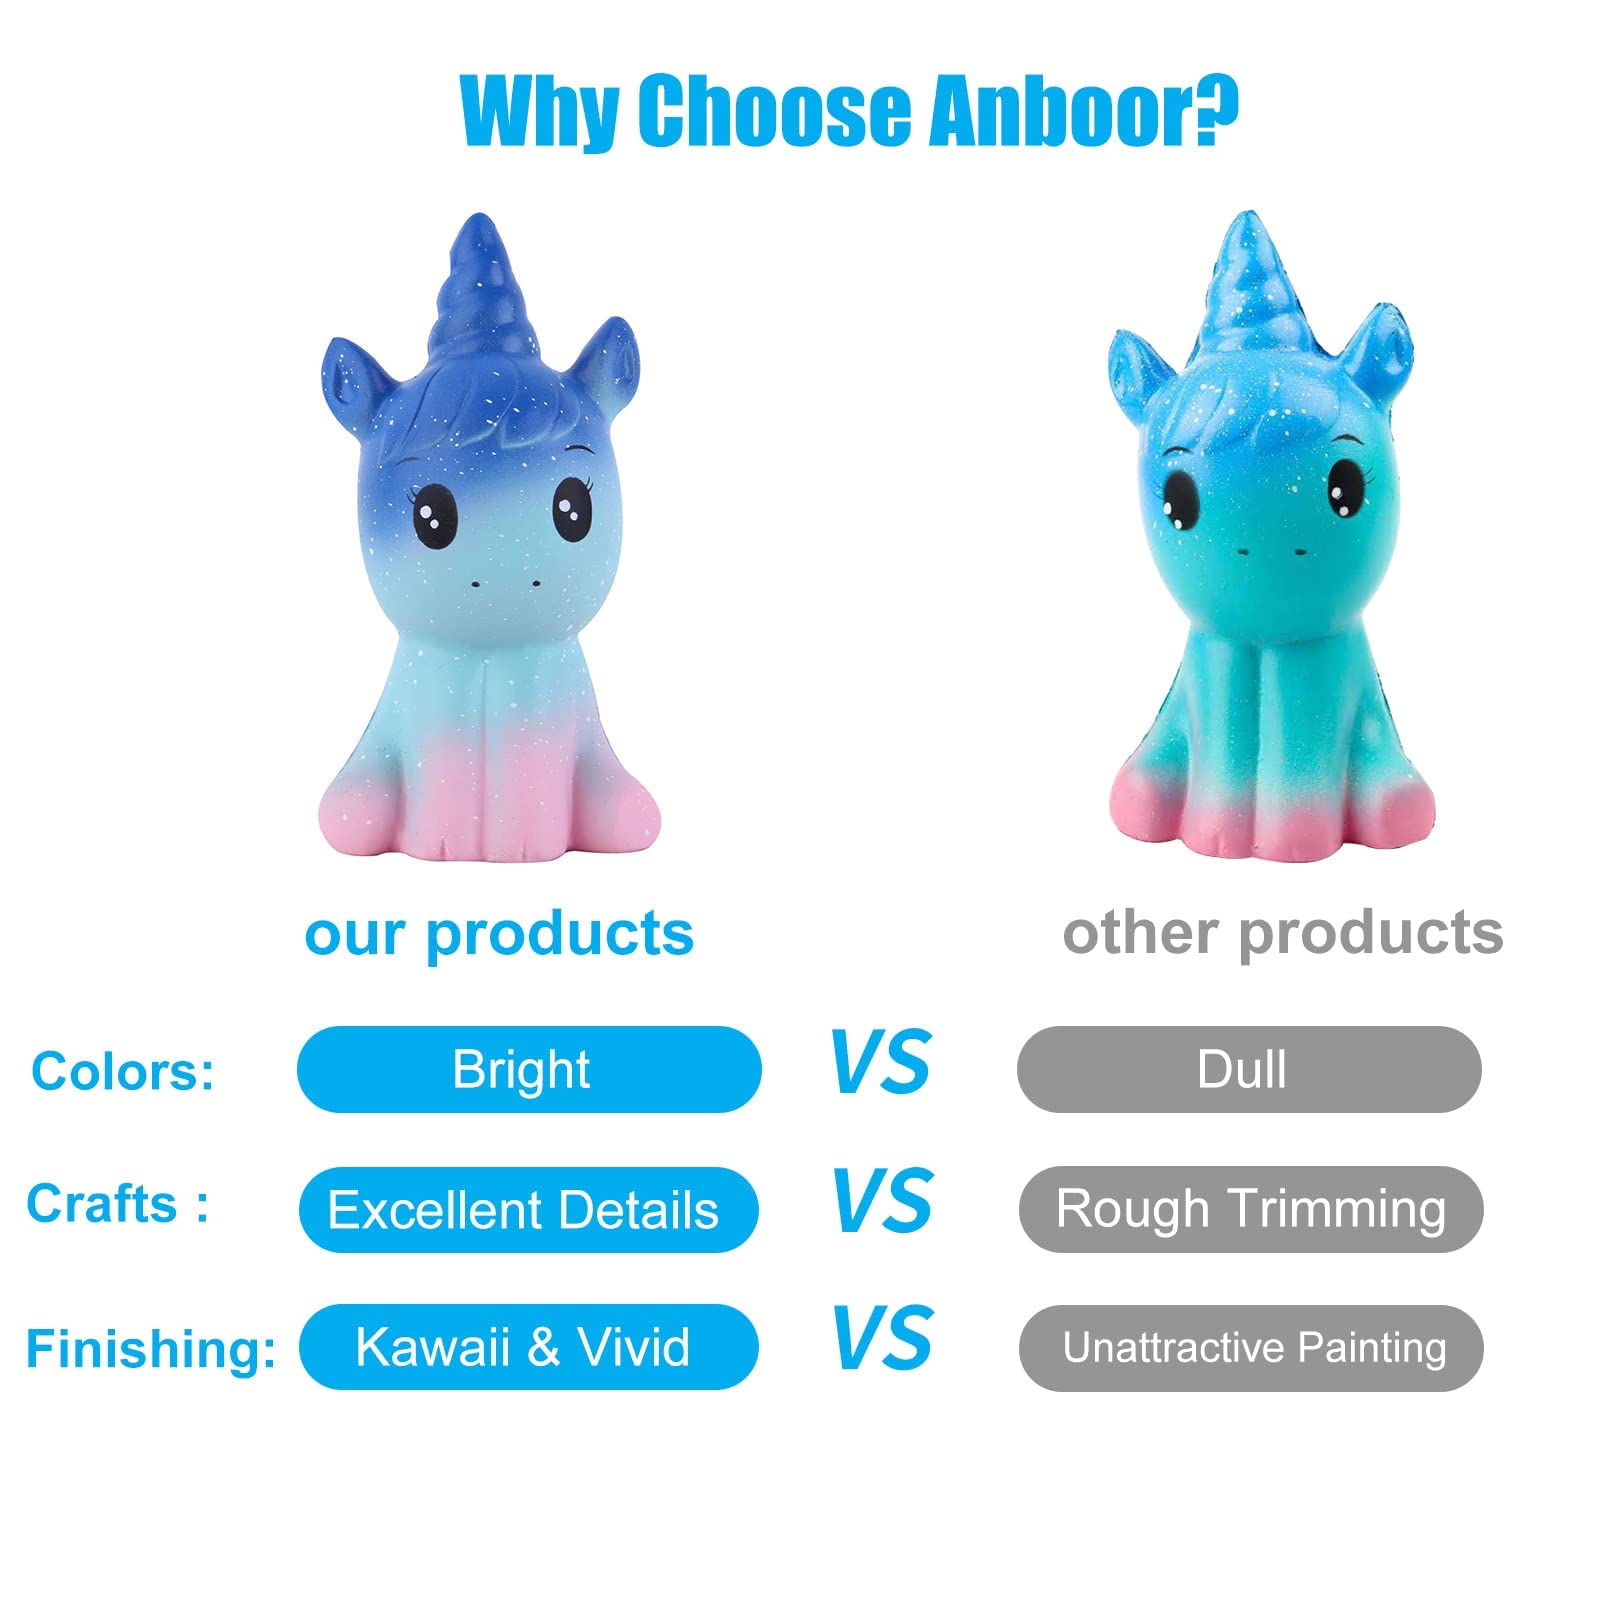 Anboor 4.9 Inches Squishies Unicorn Galaxy Kawaii Soft Slow Rising Scented Animal Squishies Stress Relief Kids Toys (Galaxy + White)